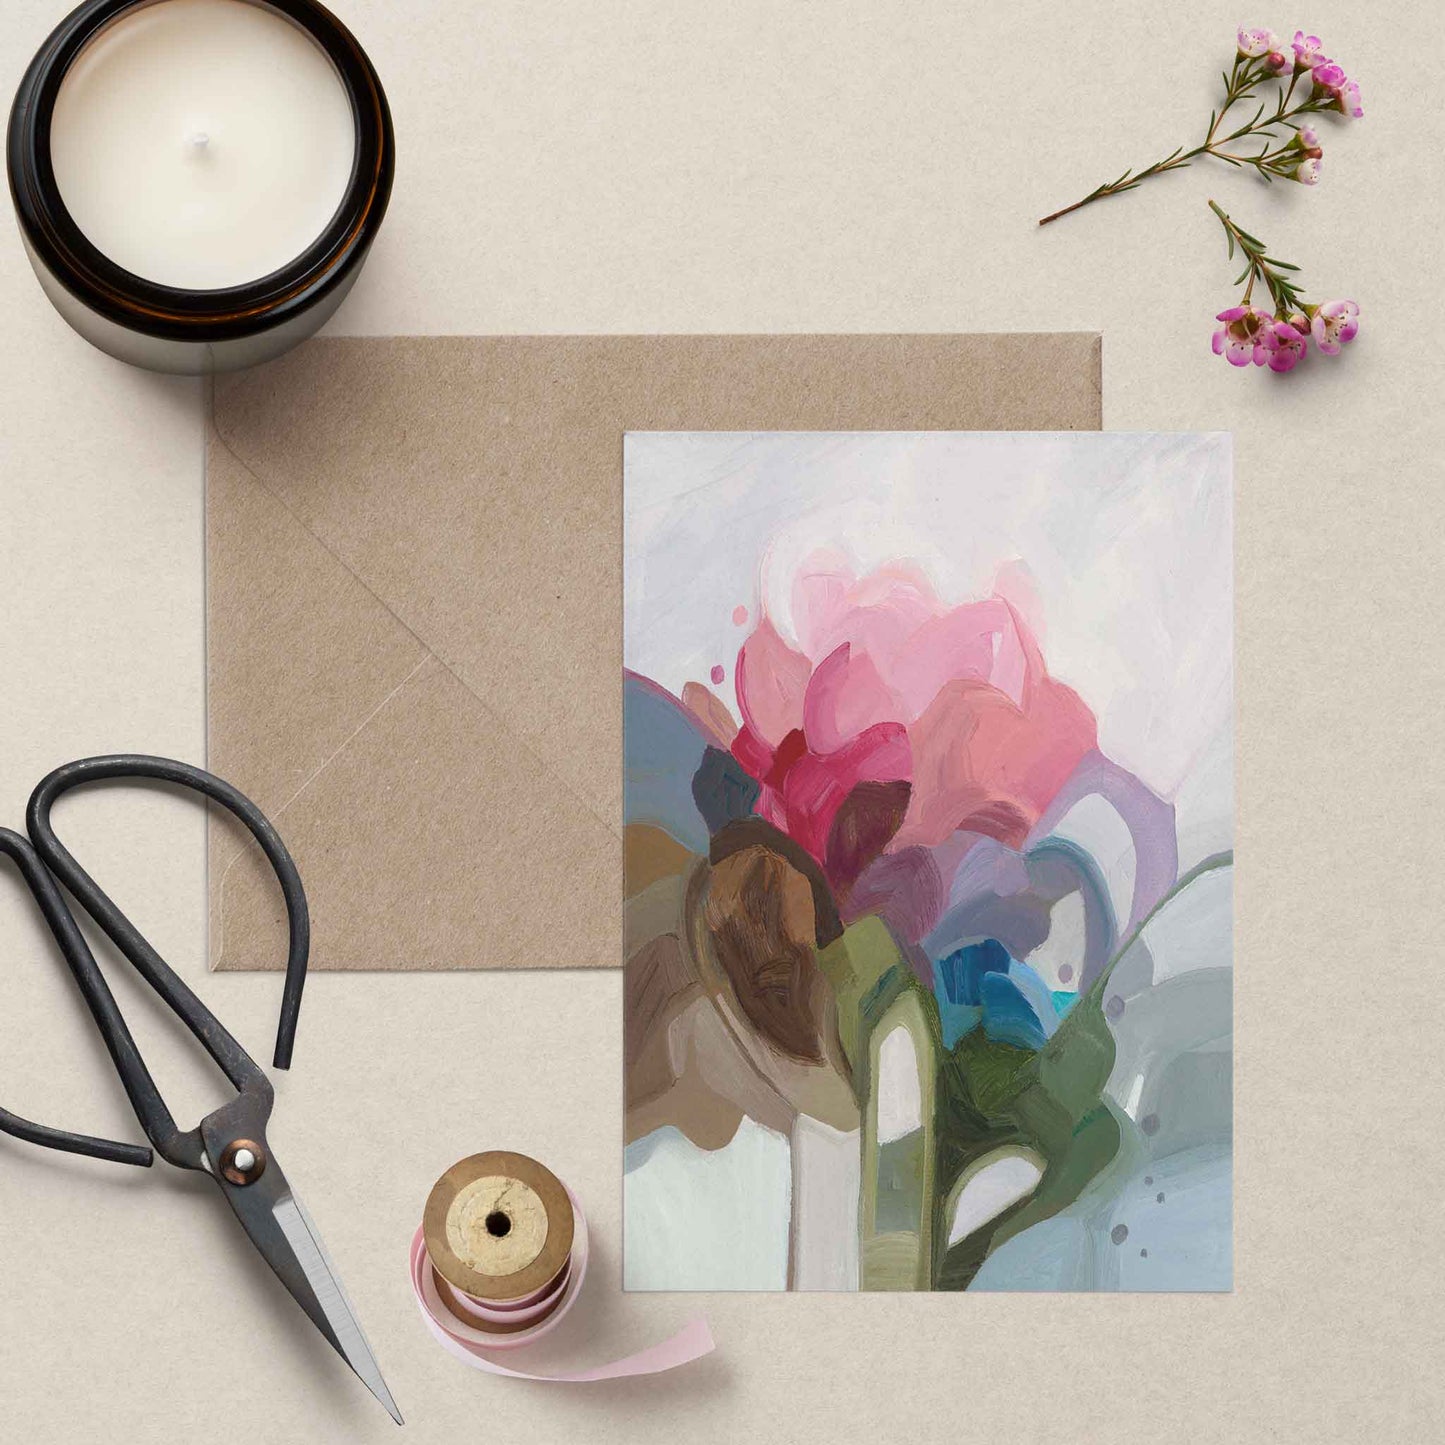 blank art greeting card UK with abstract artwork and kraft envelope